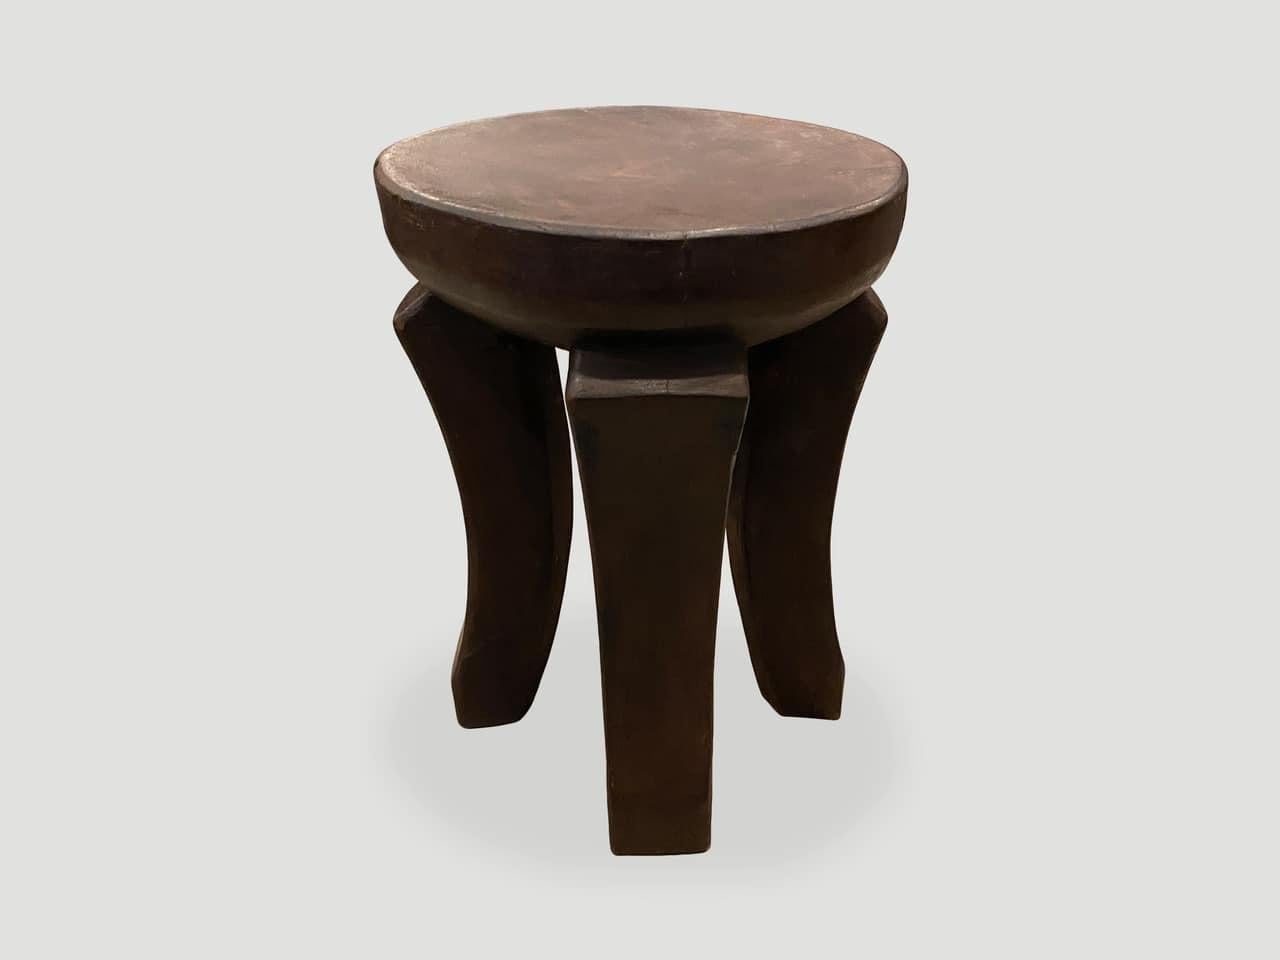 Antique African side table or stool hand carved from a single block of mahogany wood. The top is a thick bevel with beautiful hand carved legs. We only source the best. We have a pair. The price and images reflect the one shown.

This side table